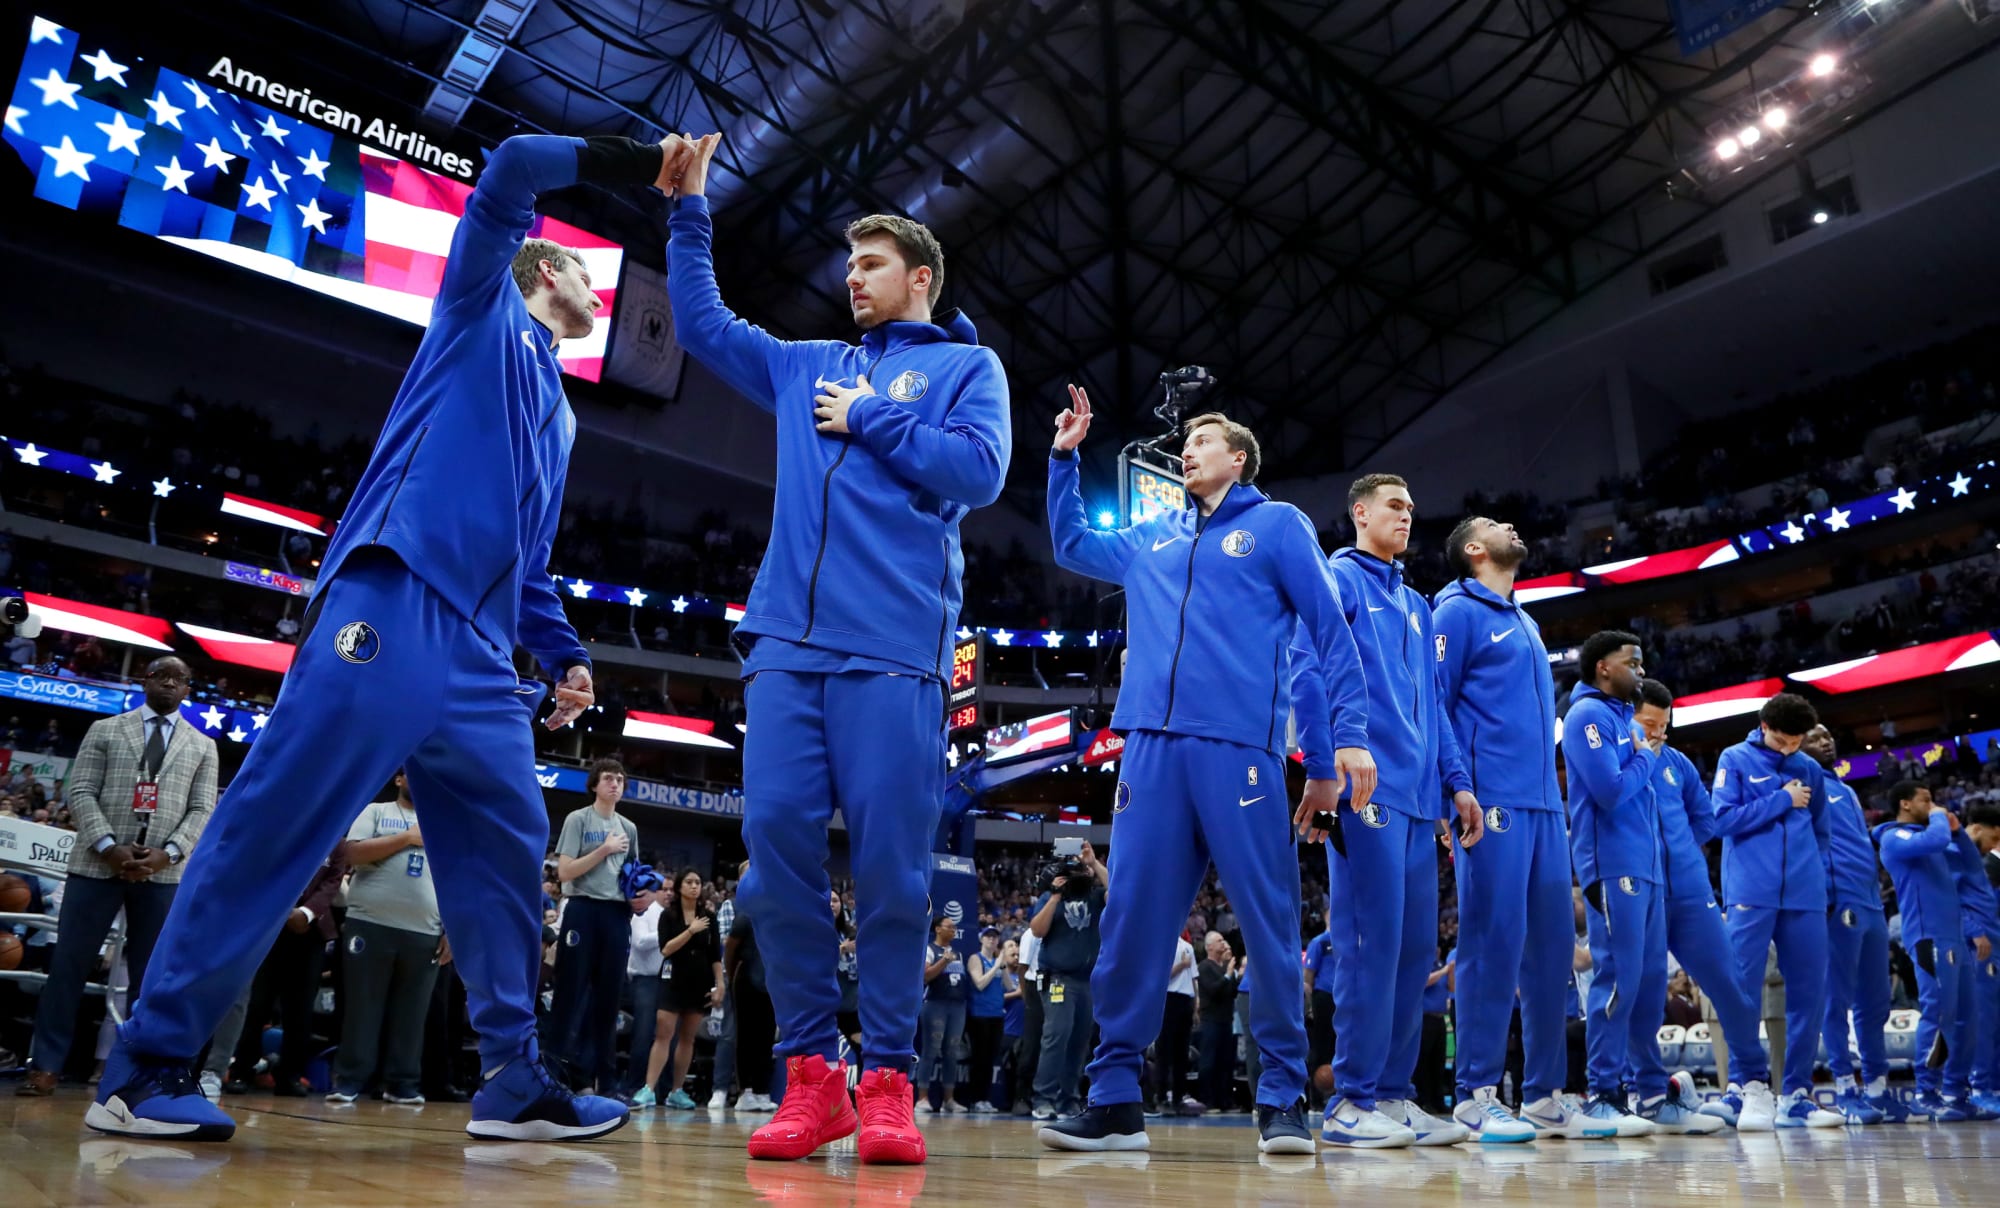 Dallas Mavericks: How many players will get regular minutes this year?